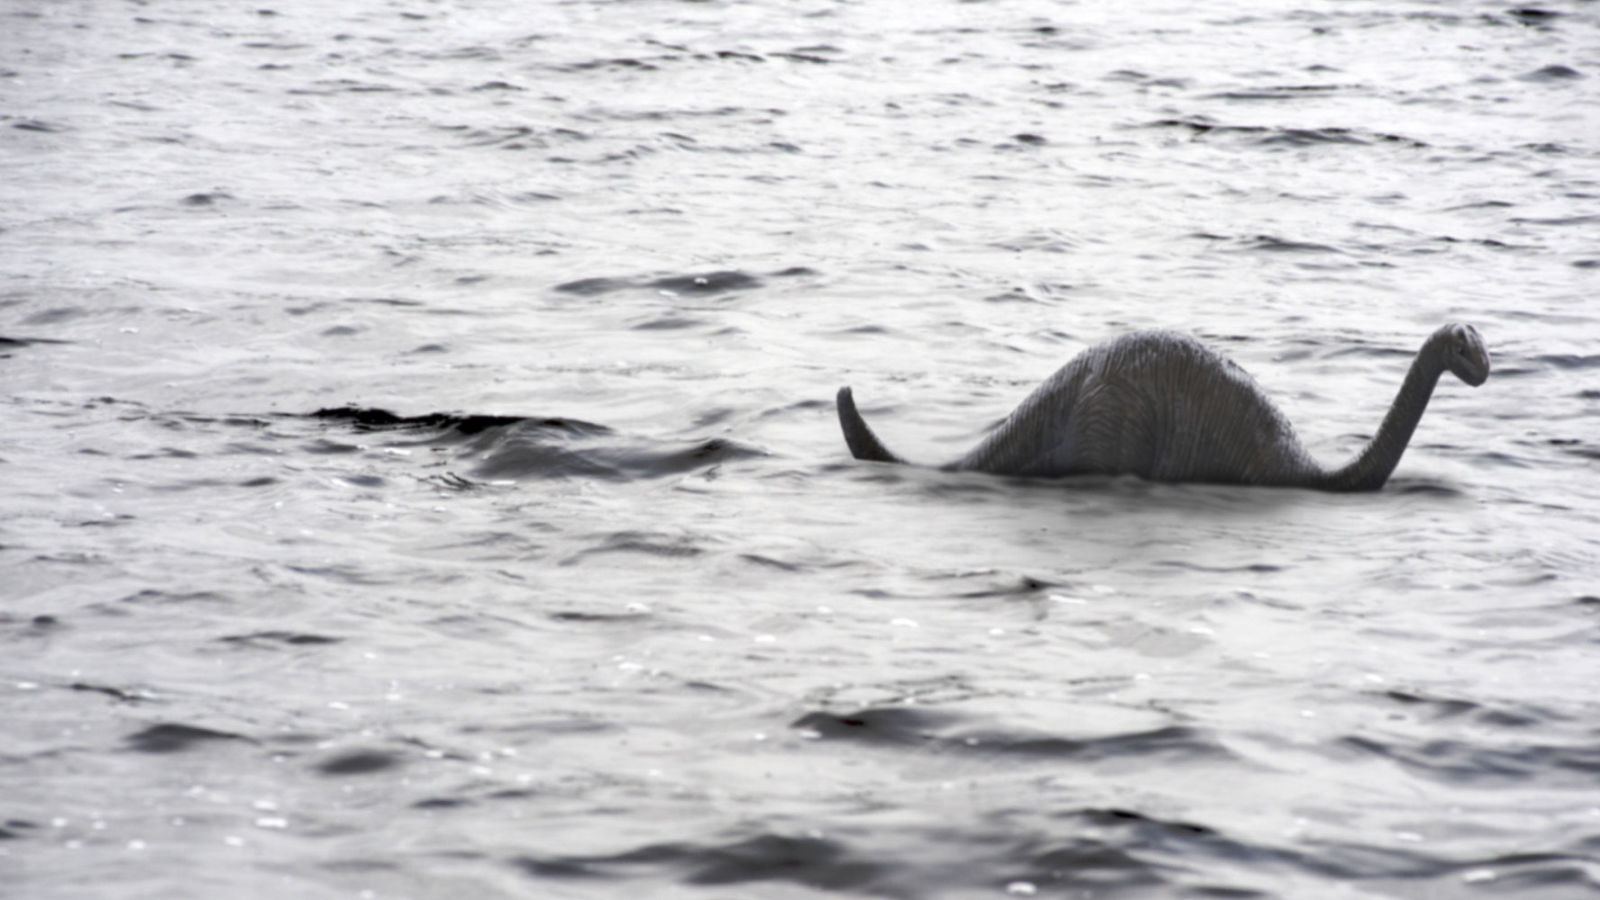 This new photograph is definitely the loch ness monster and not a sea lion